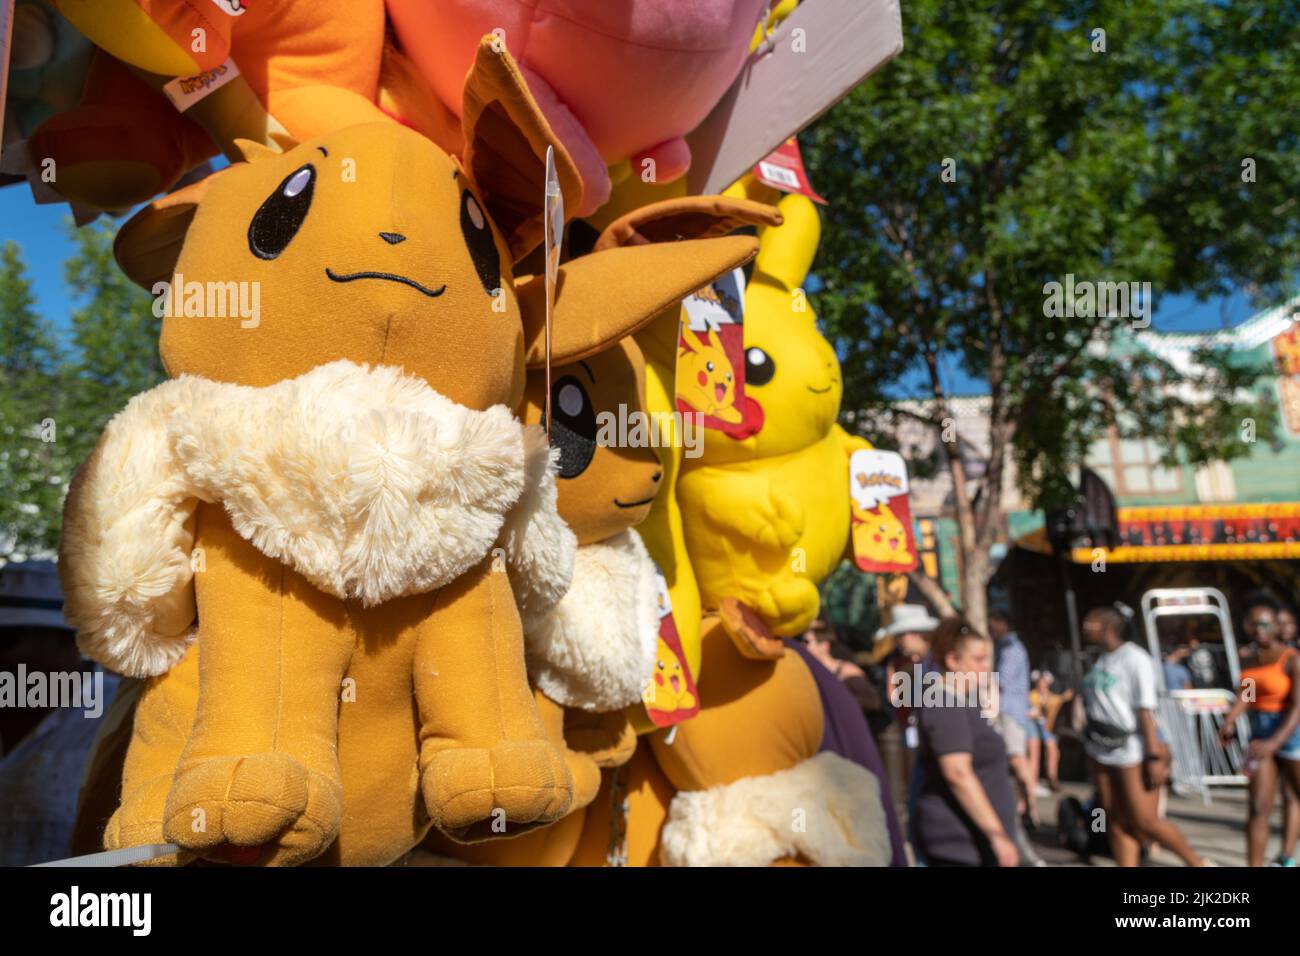 Calgary, Alberta, Canada - July 16, 2022: A Eevee pokemon stuffed plush toy  offered as a prize for winning a carnival game Stock Photo - Alamy